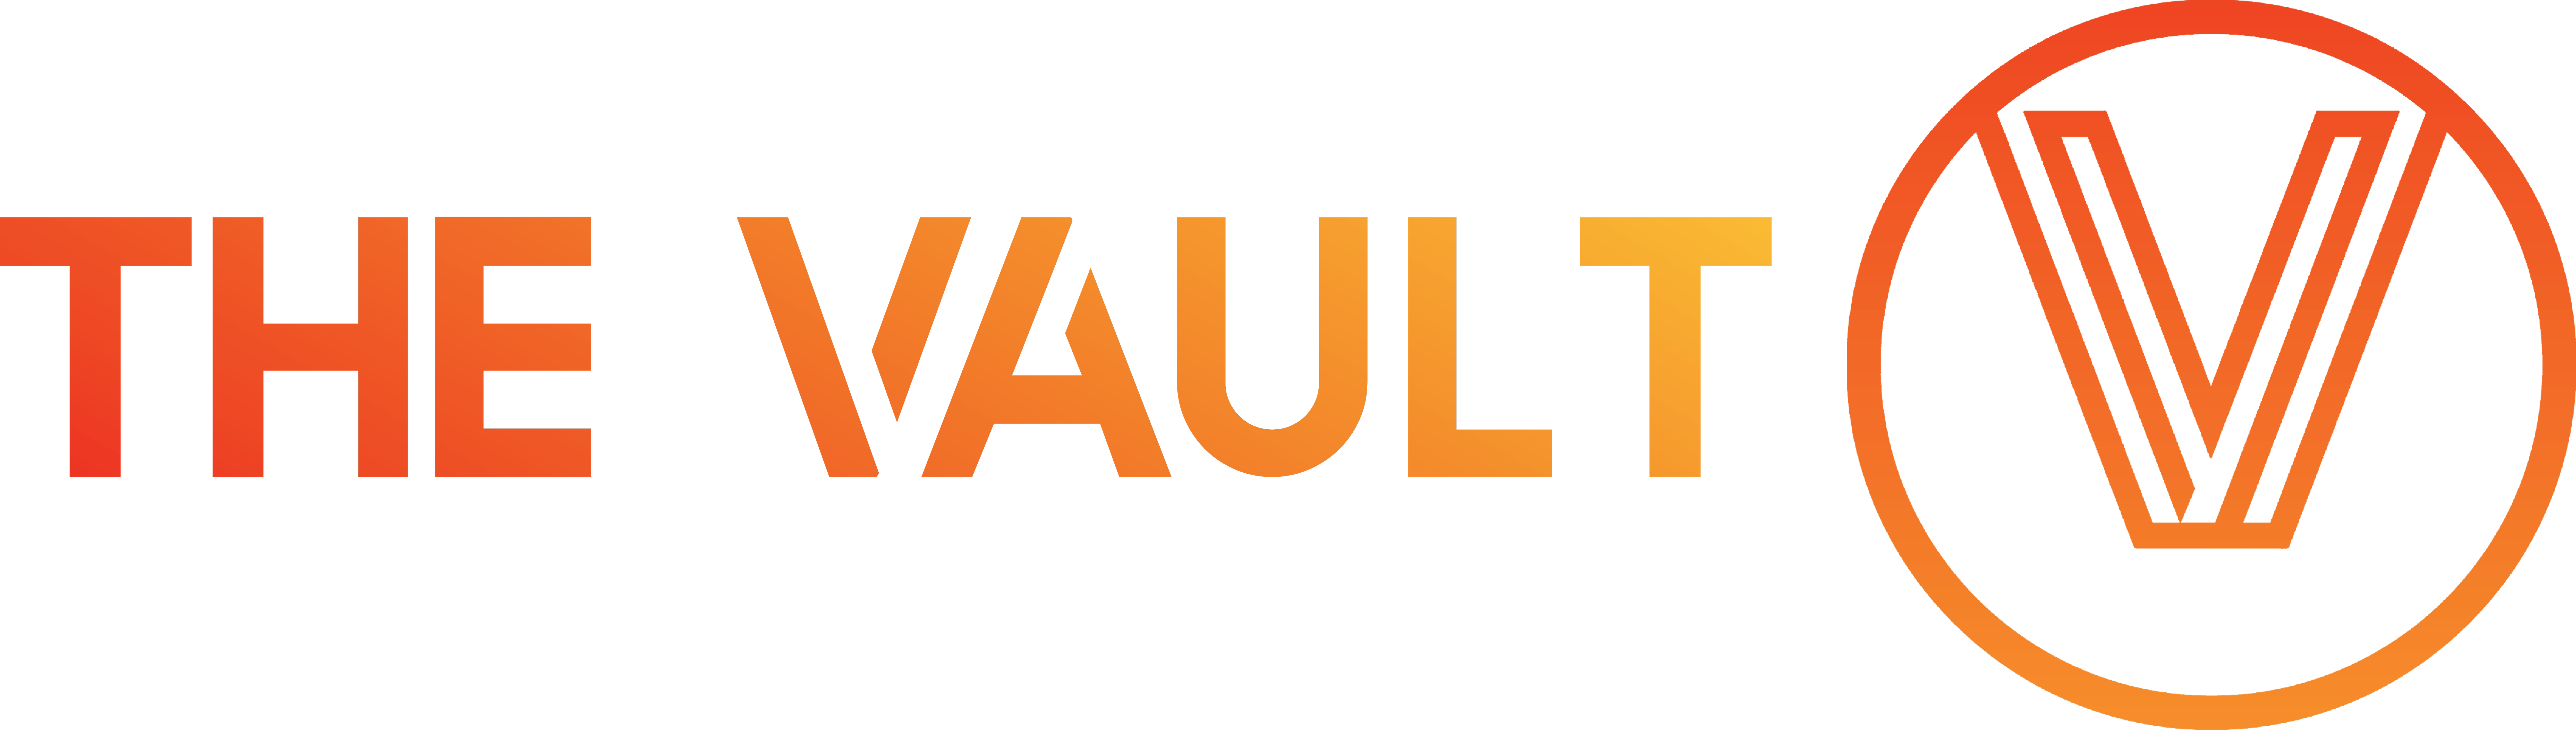 The Vault - Cocktail and Wine Lounge located in Morley, West Yorkshire